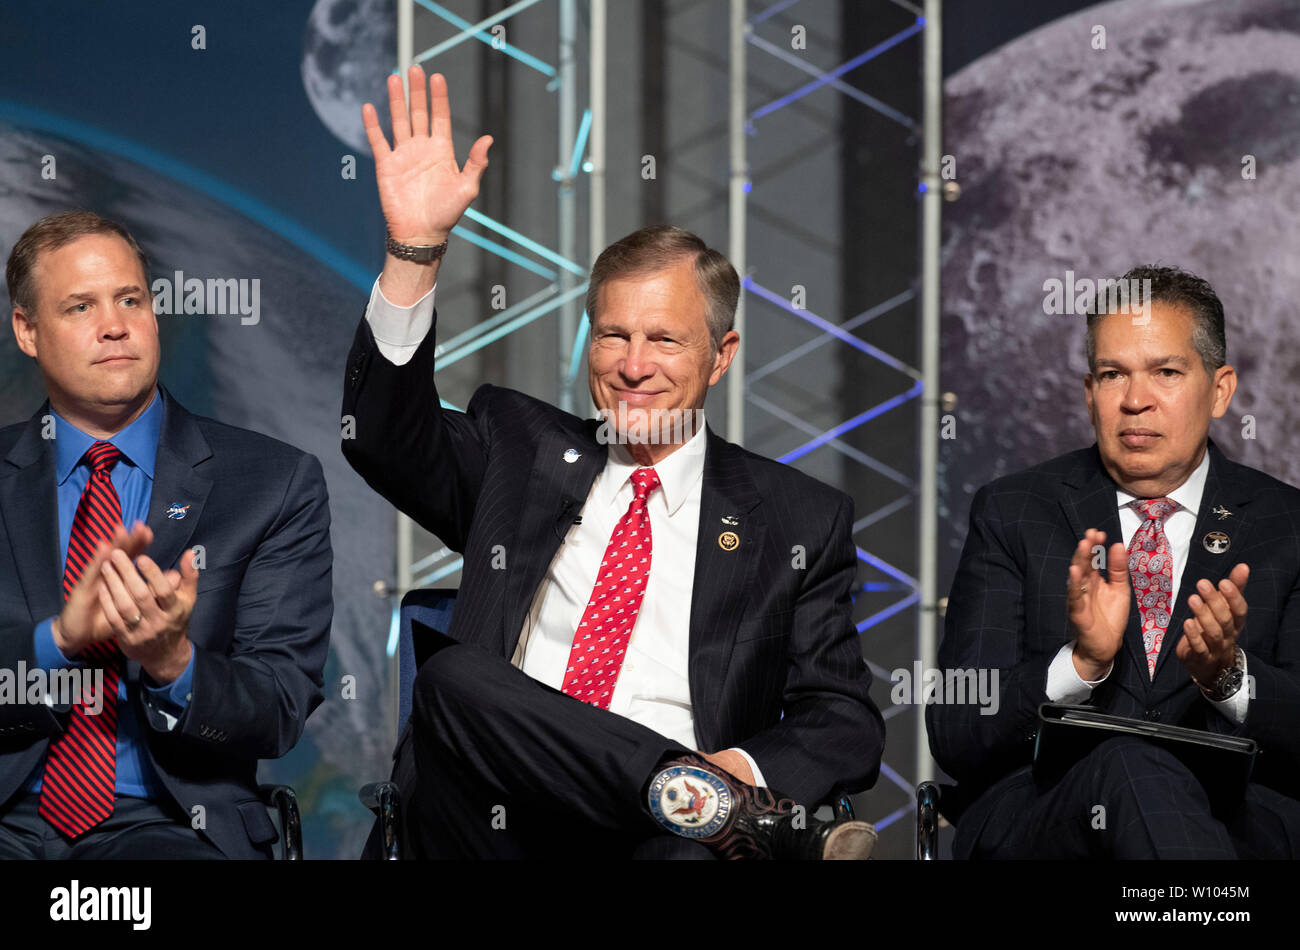 Congressman Dr. Brian Babin of Texas waves as dignitaries gather outside Houston to dedicate the restored Mission Control Center in honor of the 50th anniversary of Apollo 11's 1969 moon landing. On left is NASA Administrator Jim Bridenstine; on right is Space Center Houston CEO William Harris. Stock Photo